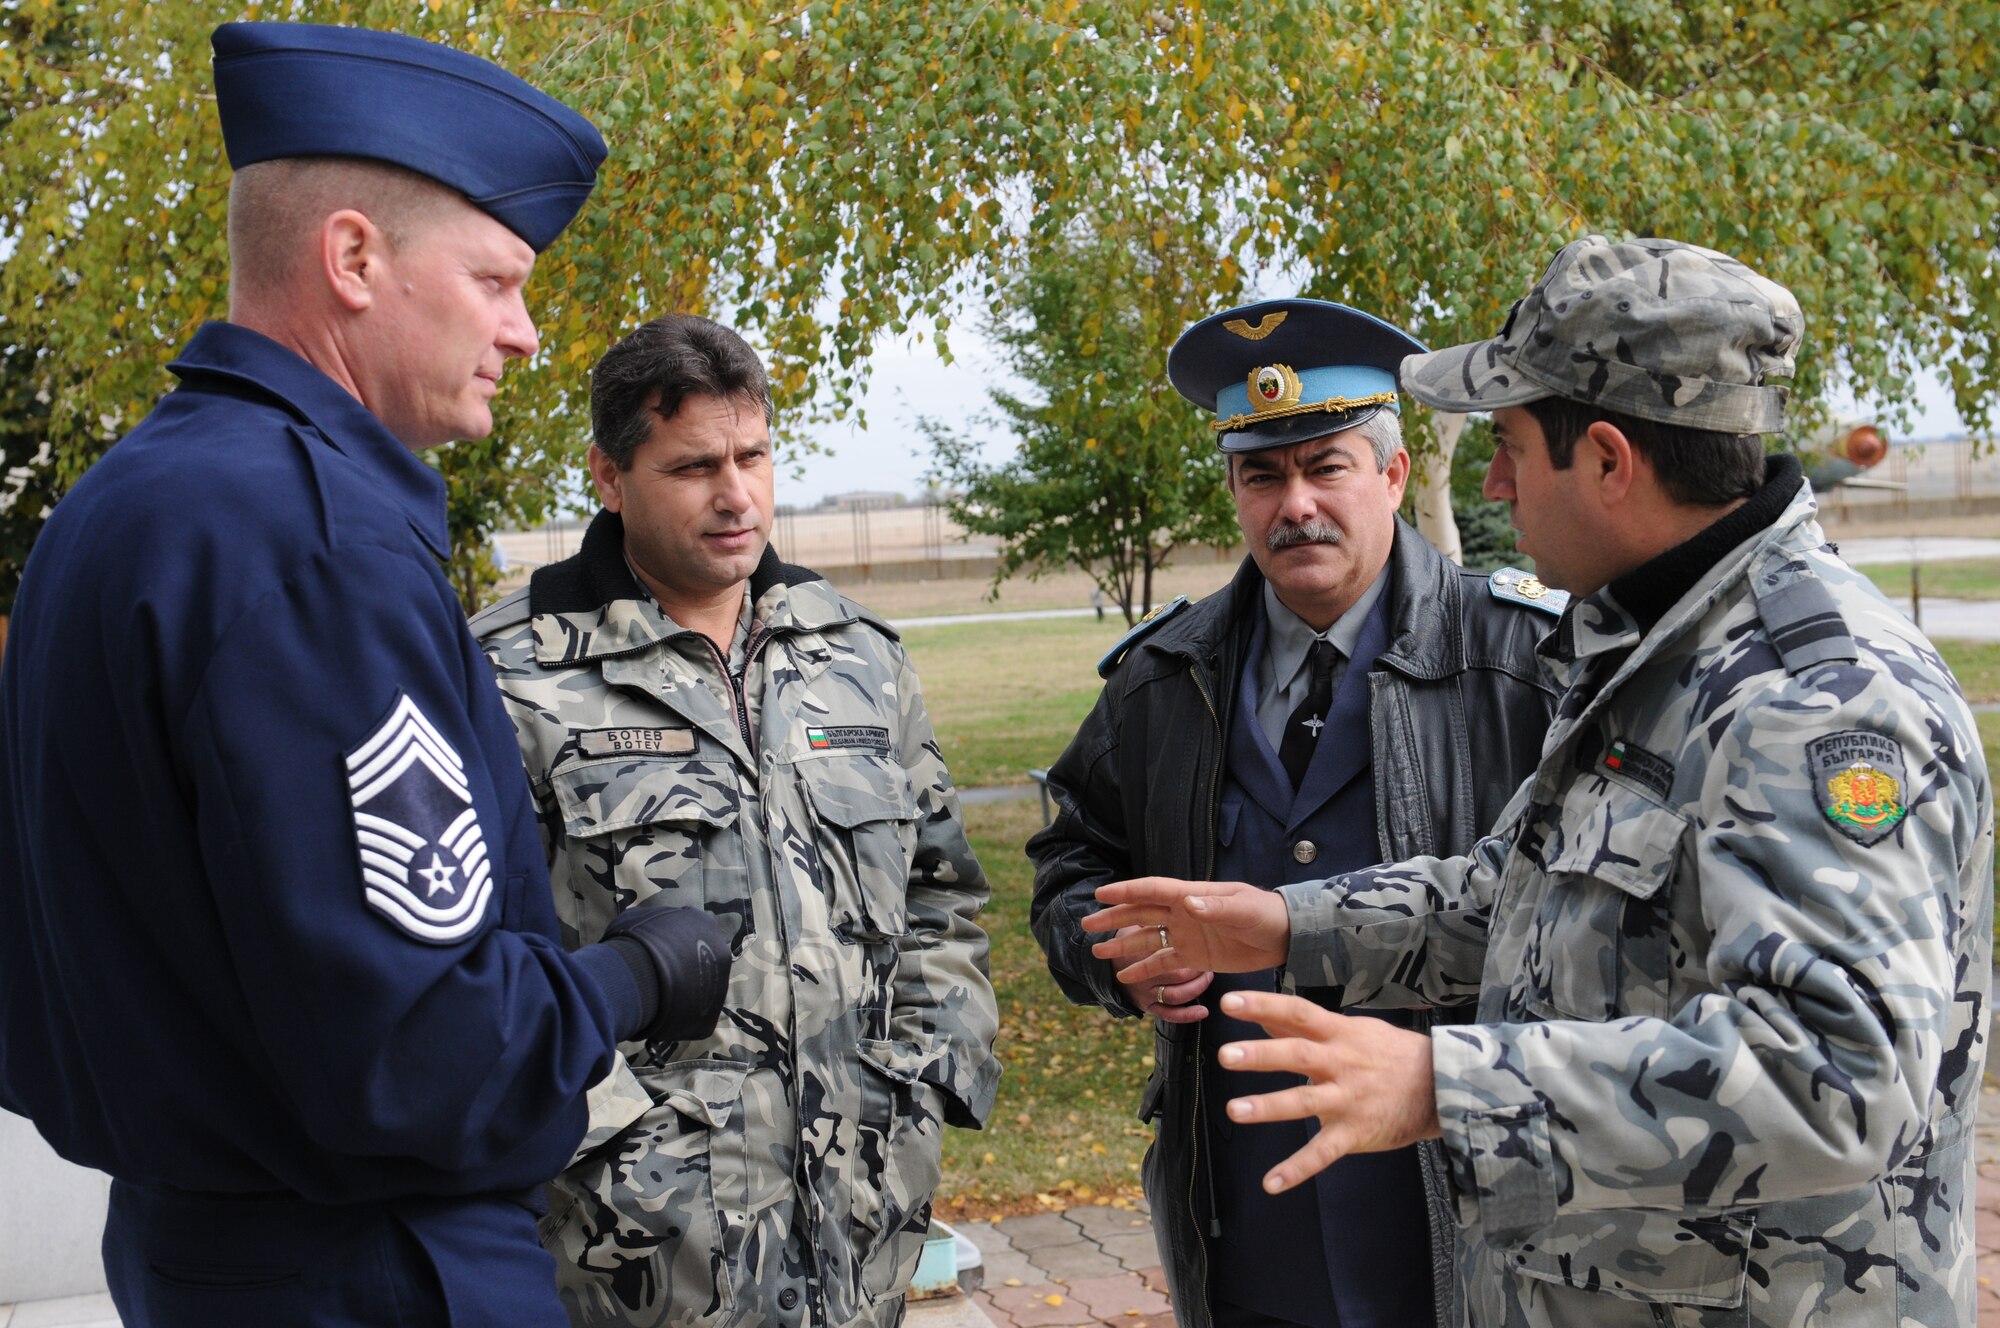 Chief Master Sgt. David Lawrence, Kipling NCO Academy commandant, left, discusses enlisted force development issues with Chief Master Sergeant Kalin Krumov, right, Warrant Officer Ivo Bakardijiva, acting chief master sergeant of the Bulgarian air force, second from right, and Bulgarian Chief Master Sgt. Hristo Botev, command chief for Krumovo Air Force Base, Bulgaria. (U.S. Air Force photo by MSgt Timothy Barfield)